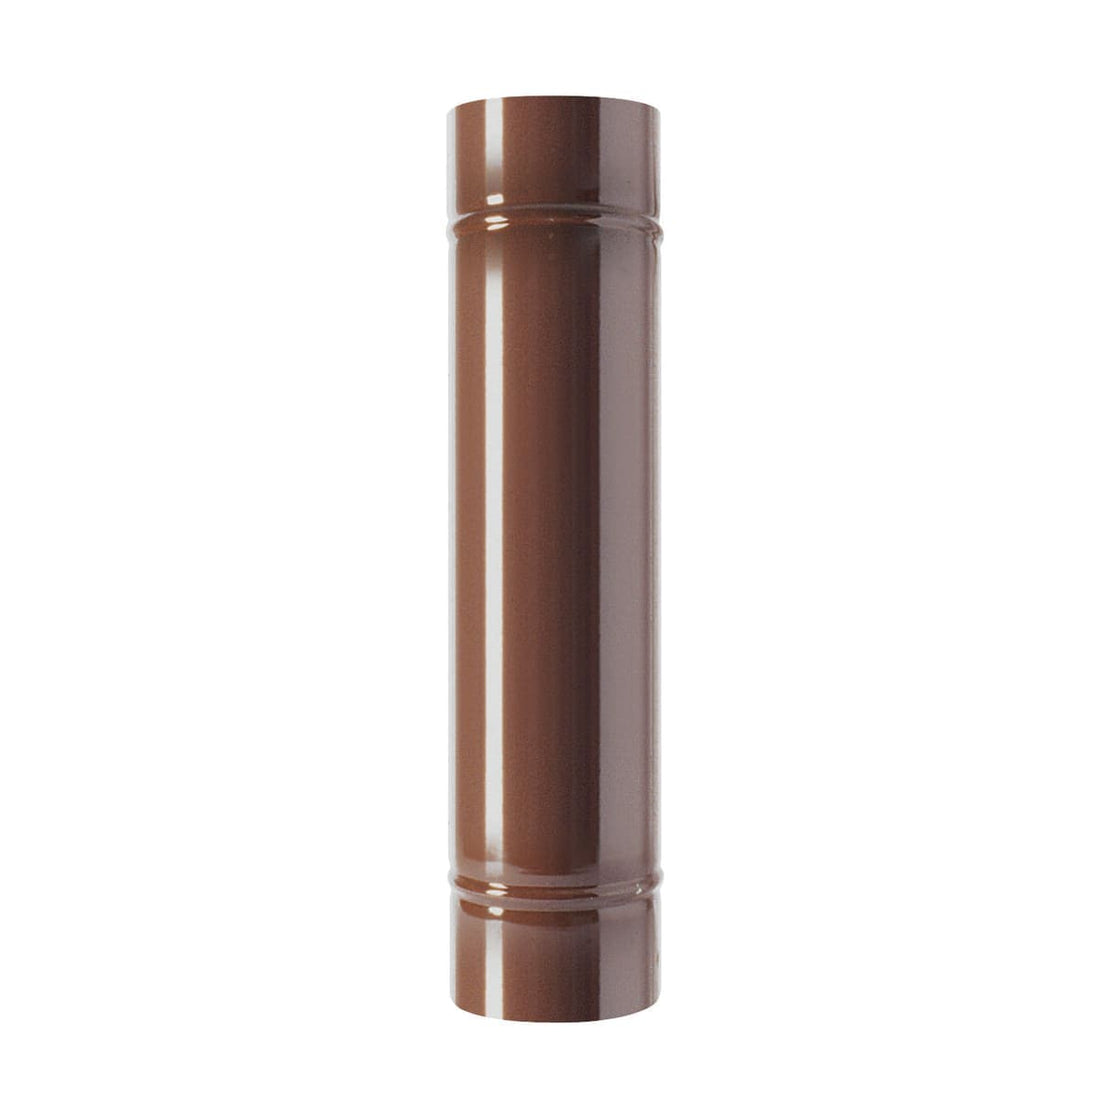 WOOD TUBE 0.5MM THICK L1000 DIA120 MM ENAMELLED BROWN